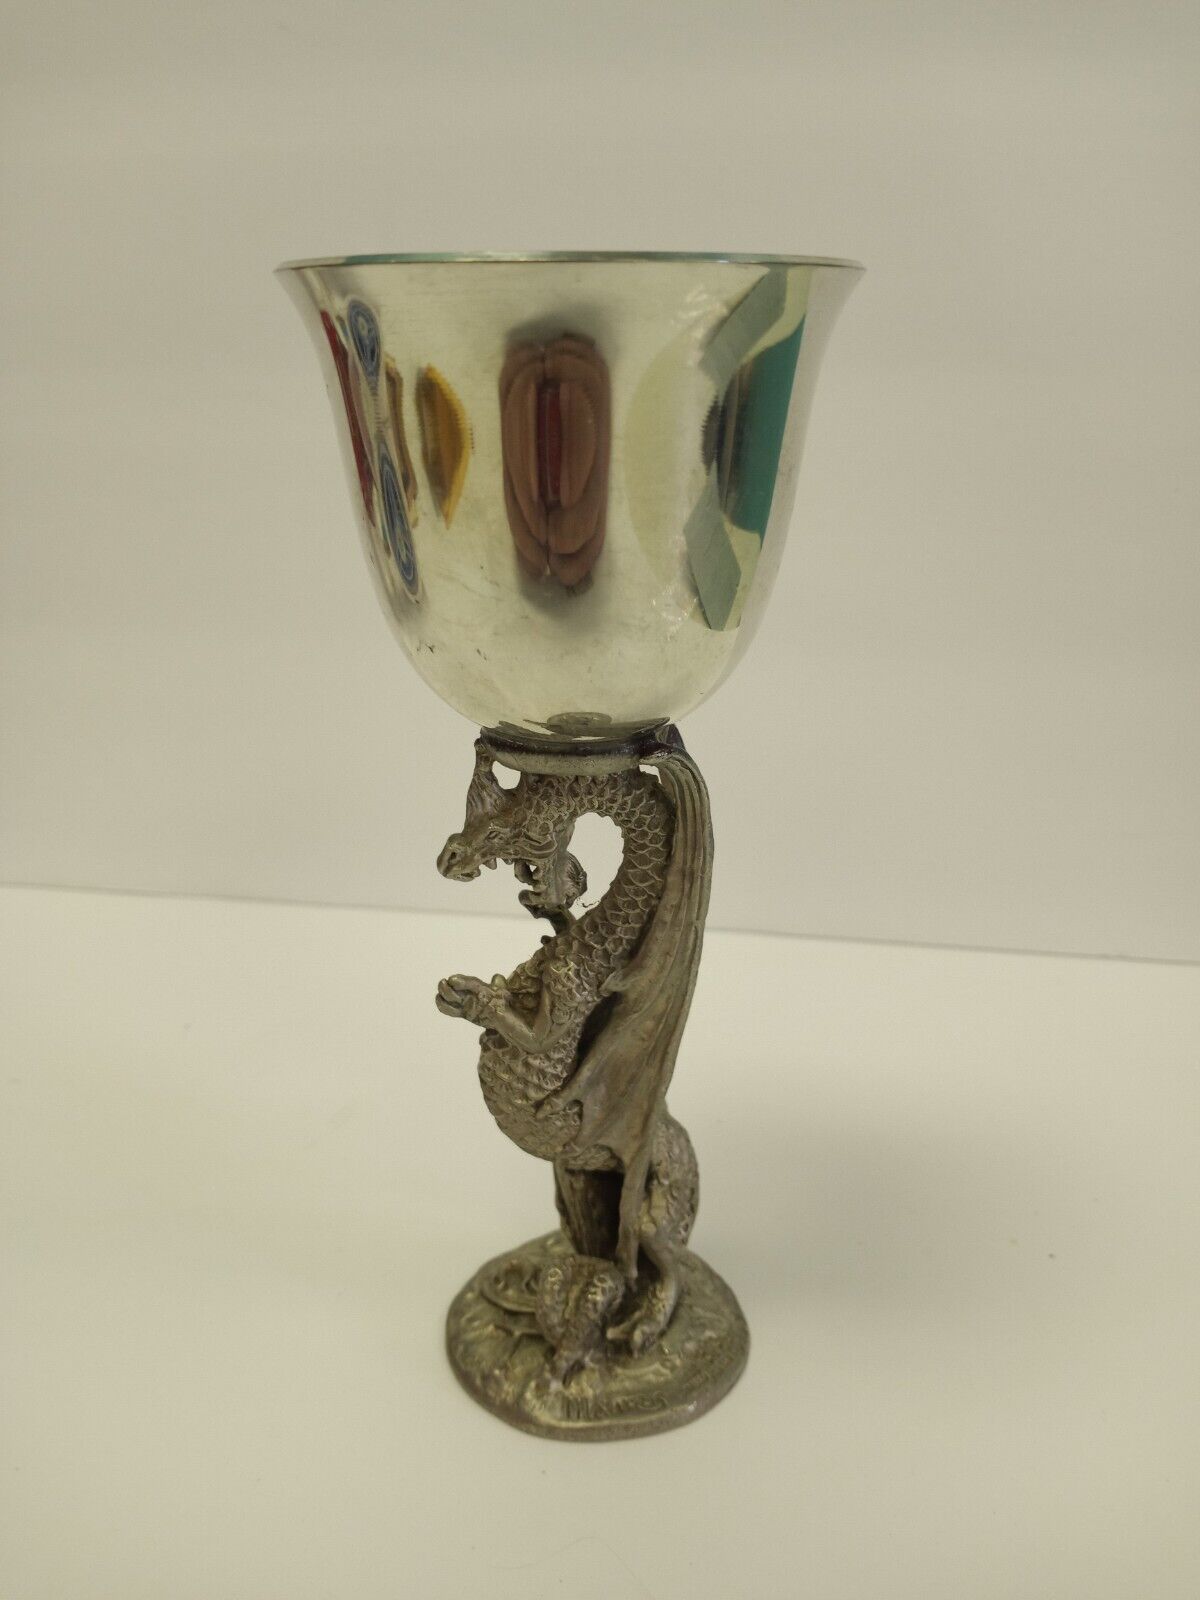 RARE Vintage Maurus Gallo Pewter Dragon Goblet Cup 1985 6.25 inches